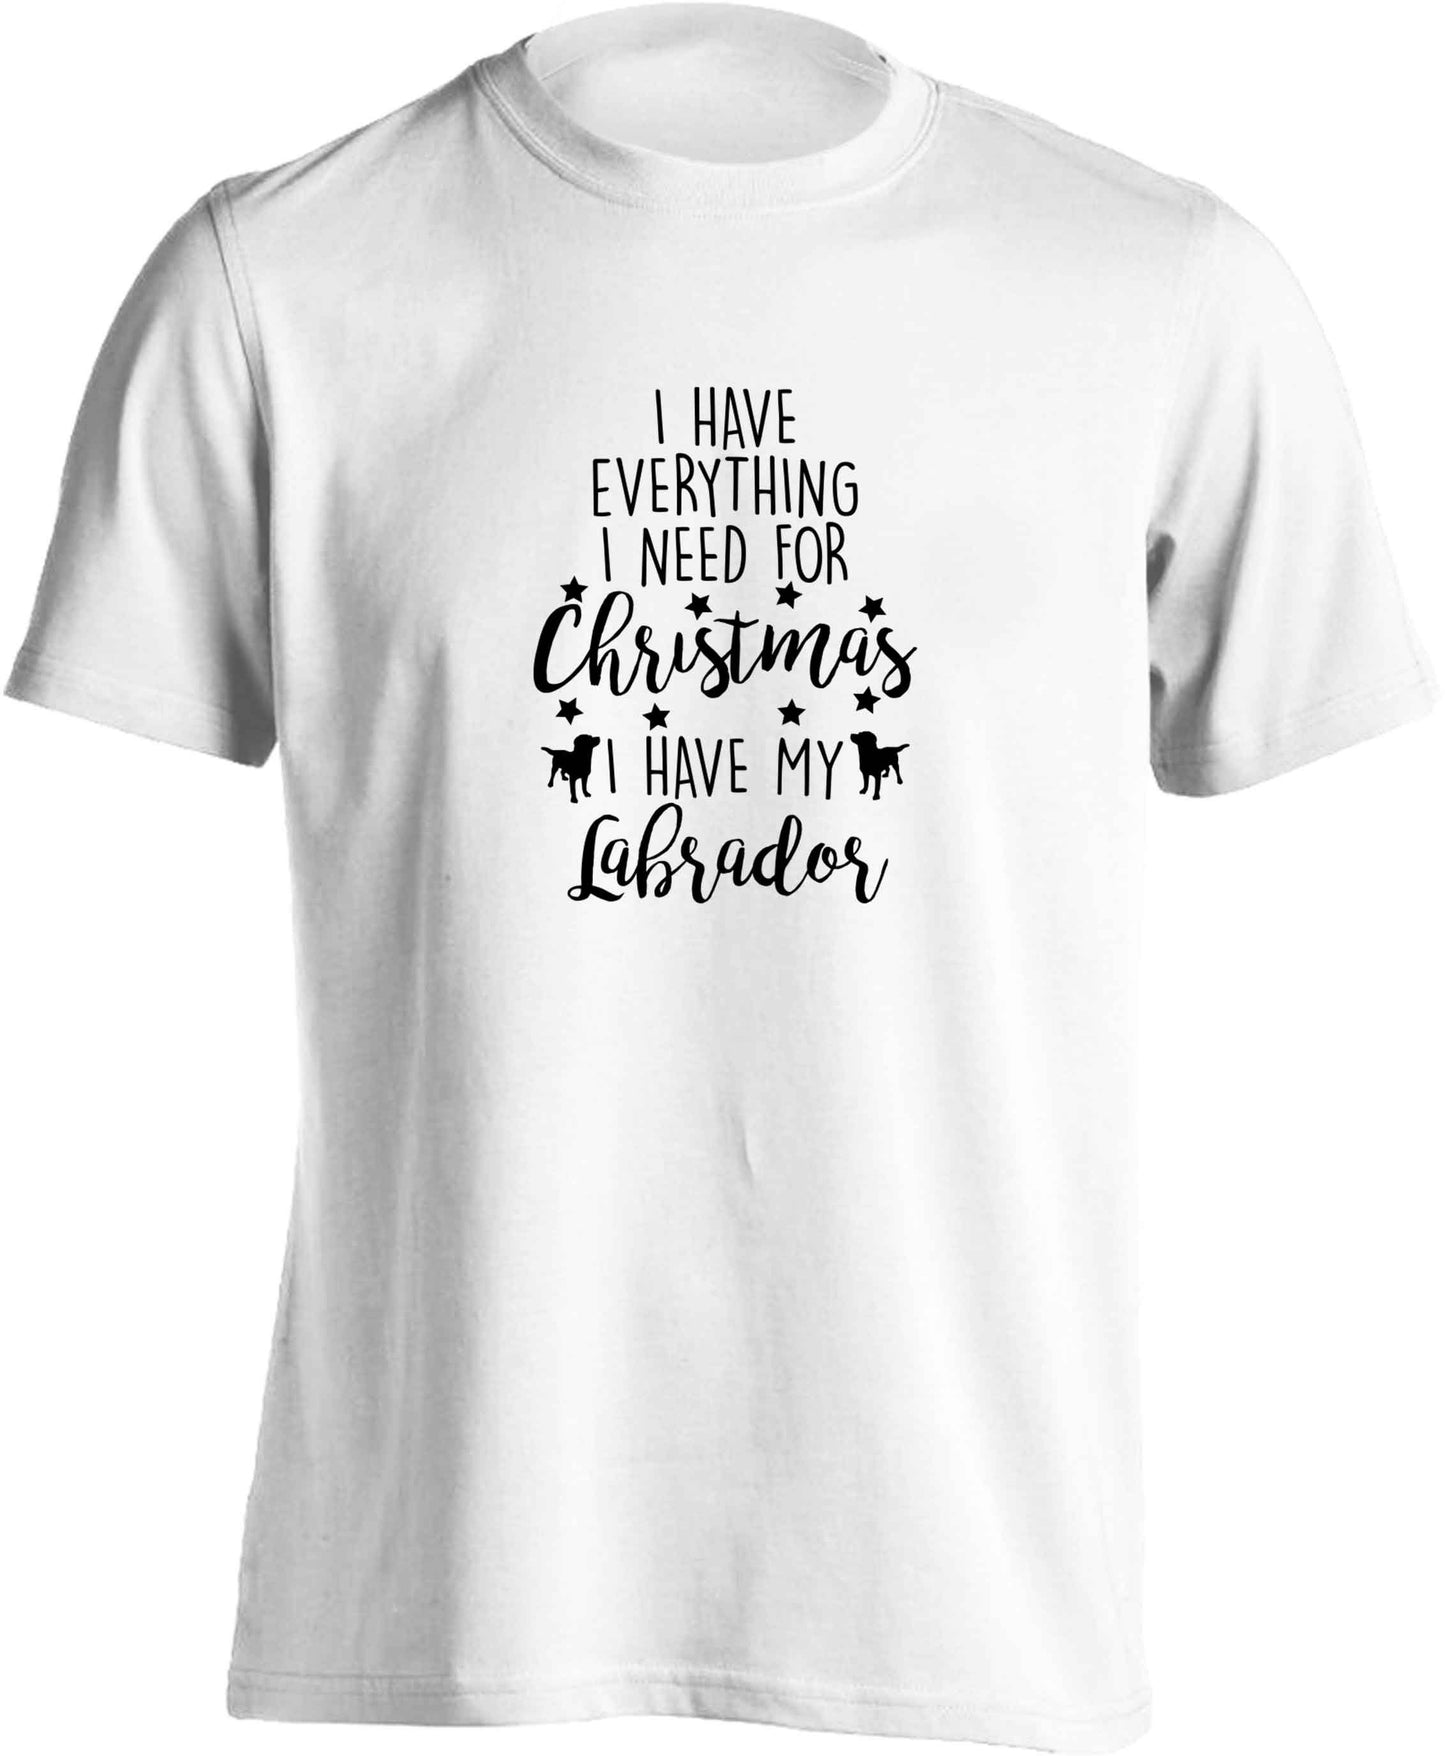 I have everything I need for Christmas I have my labrador adults unisex white Tshirt 2XL